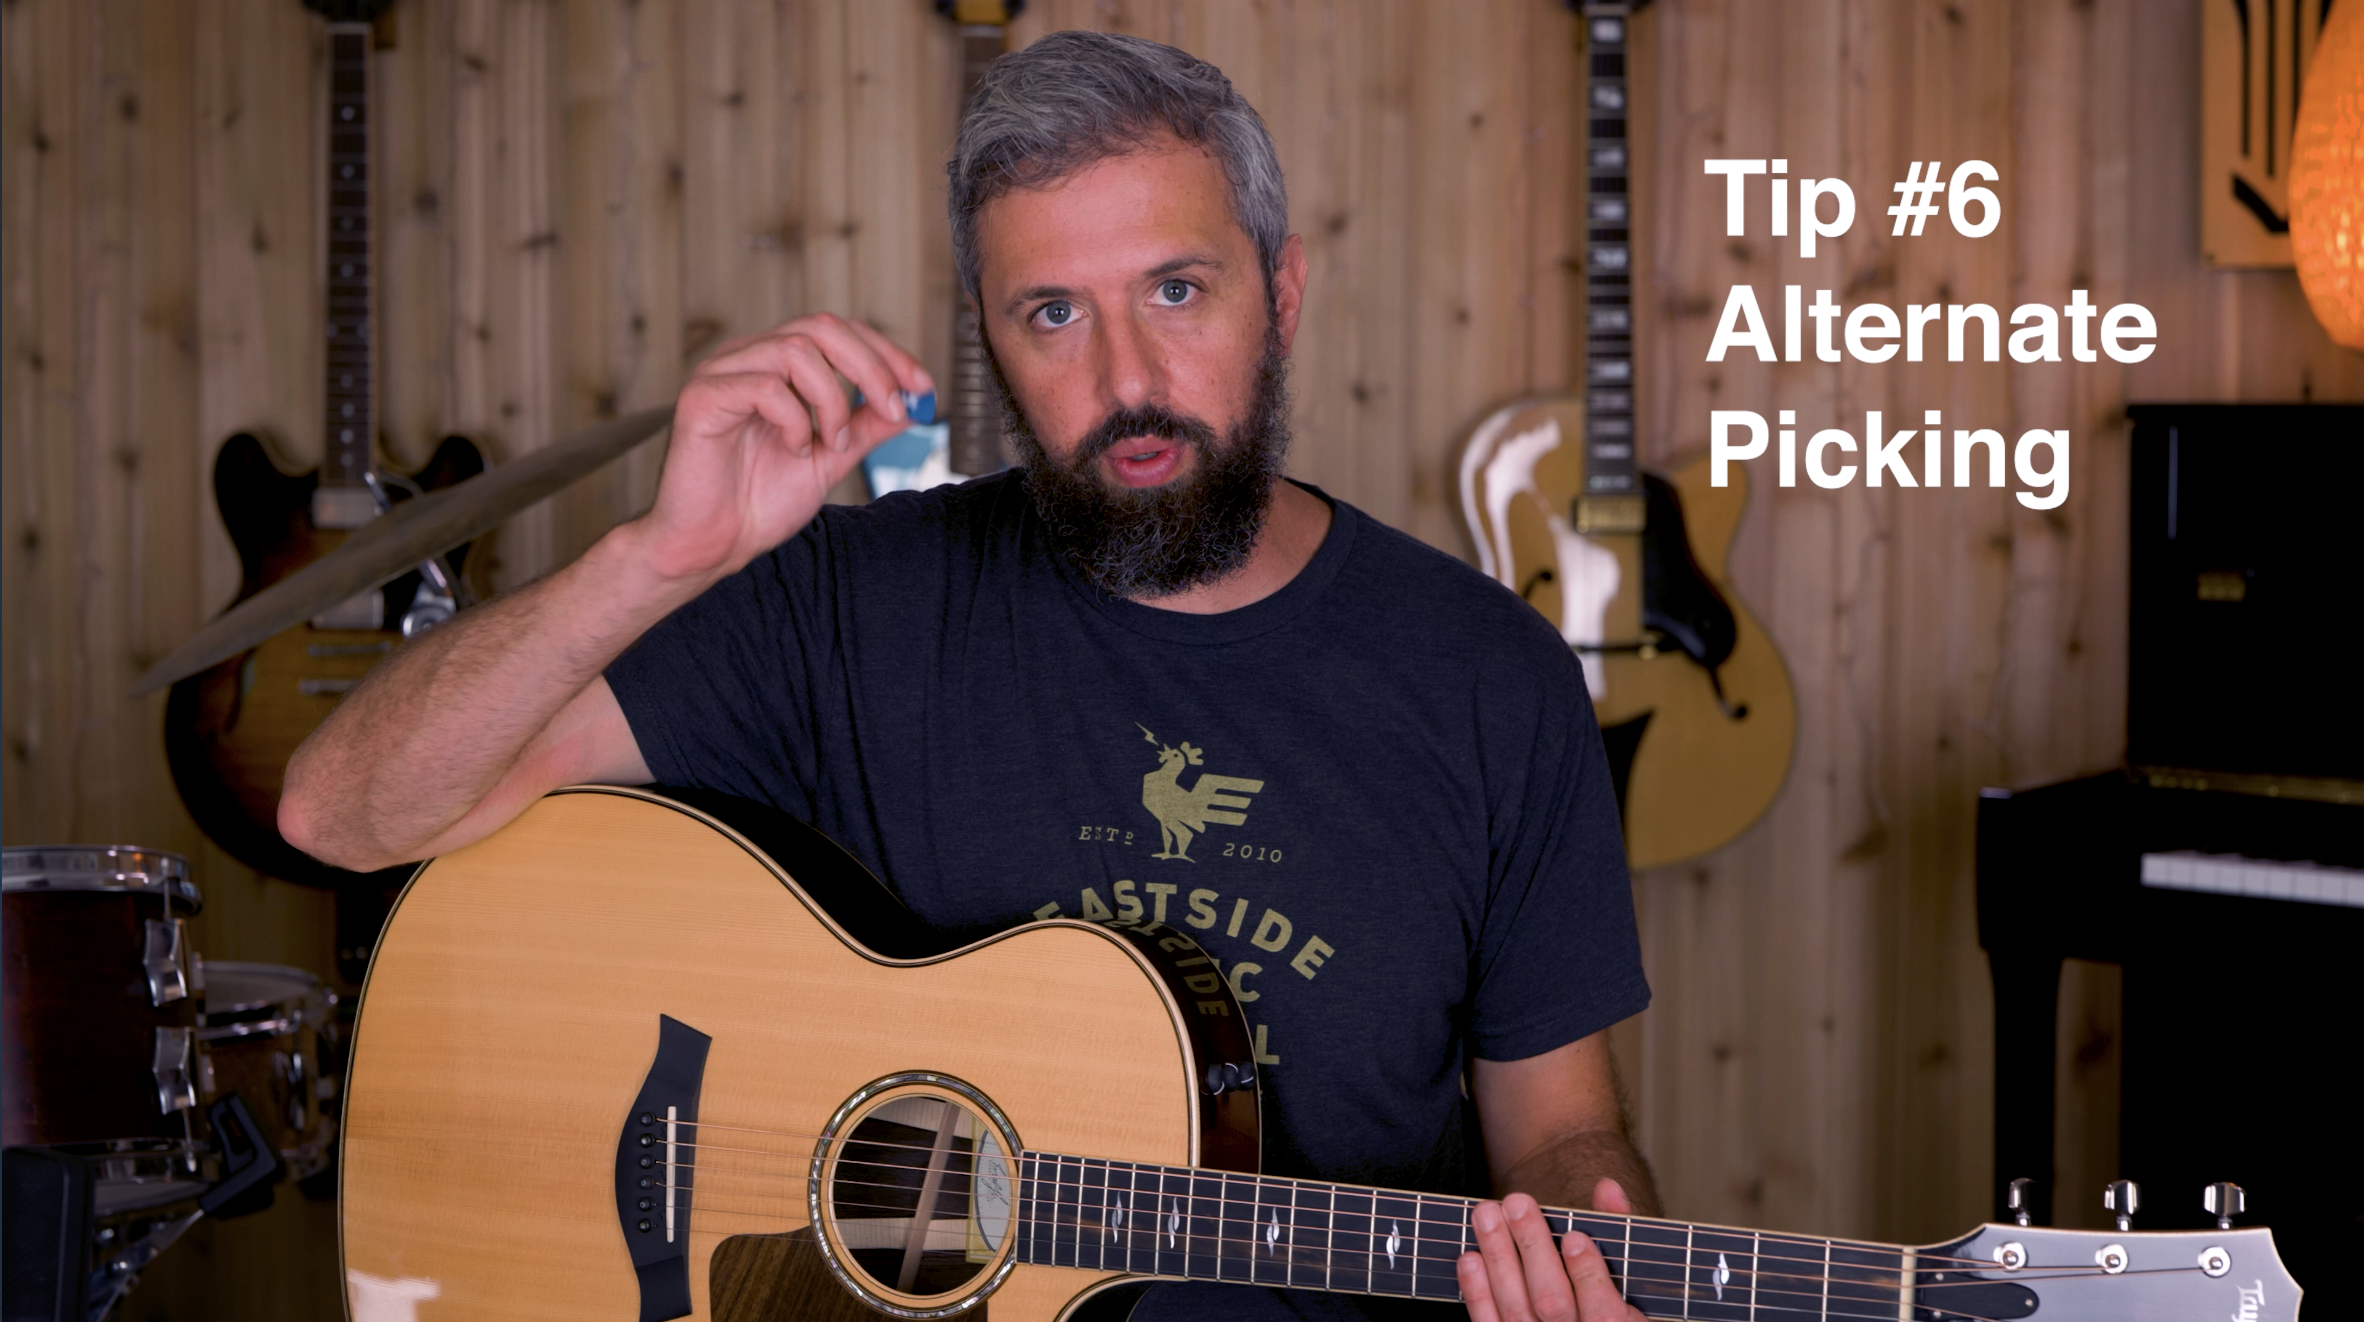 How to alternate pick on guitar